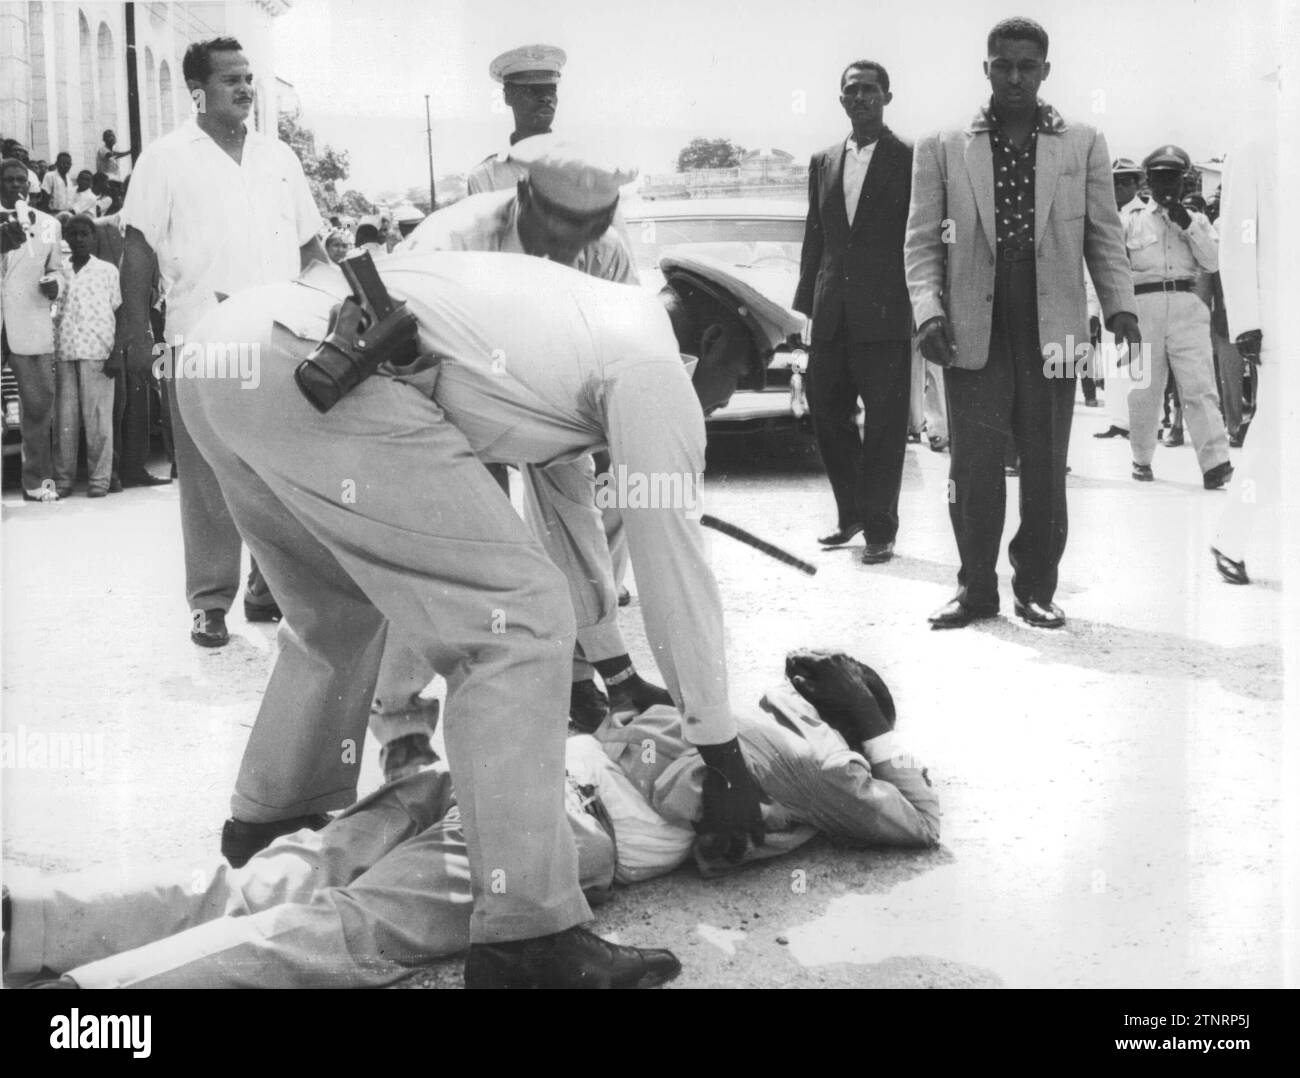 05/20/1957. A supporter of Haitian presidential candidate Francois Duvalier is pictured being searched and treated by a police officer after a rally held in Port-au-Prince. The Haitian army has had to take over the government, having imposed severe press censorship measures. The first reaction to the army's intervention has been a general strike in Port-au-Prince, which appears to have spread to the entire nation. The tension is manifest. Presidential Elections Announced for June 16. Credit: Album / Archivo ABC / Fotofiel Stock Photo